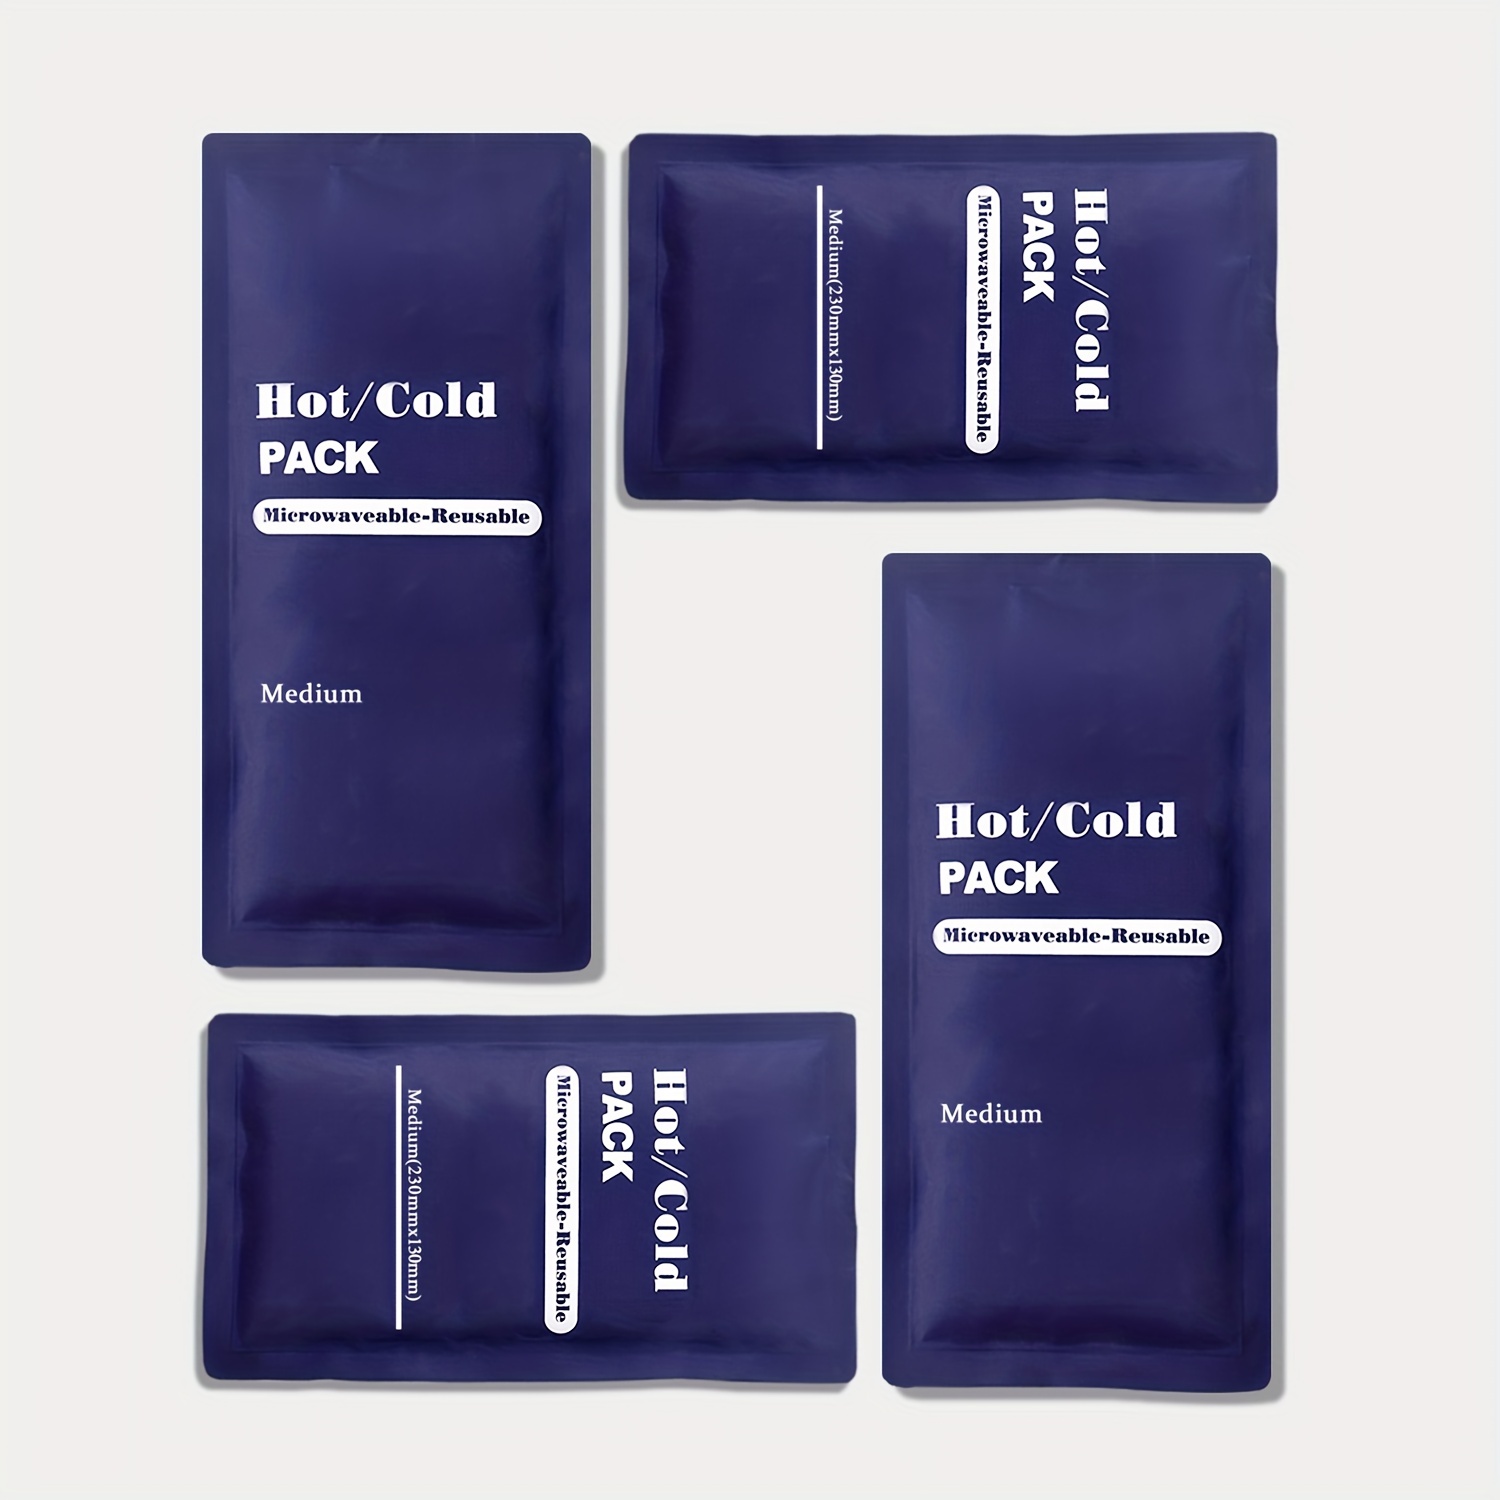 Gel Pack For Hot and Cold Pain Relief